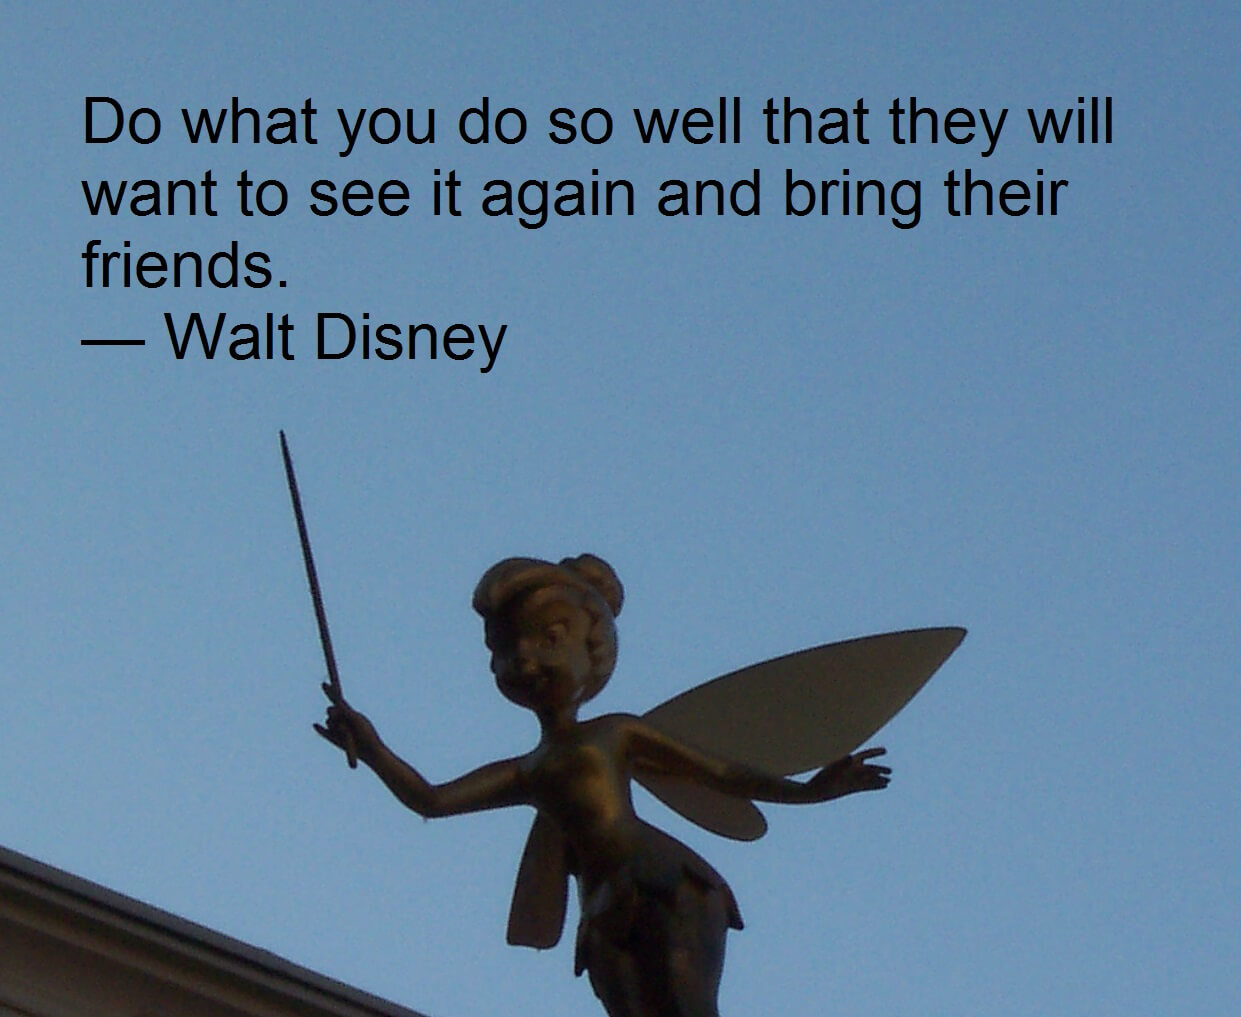 Walt Disney Quote - Do what you do so well that people can’t resist telling others about you.  Employee Engagement